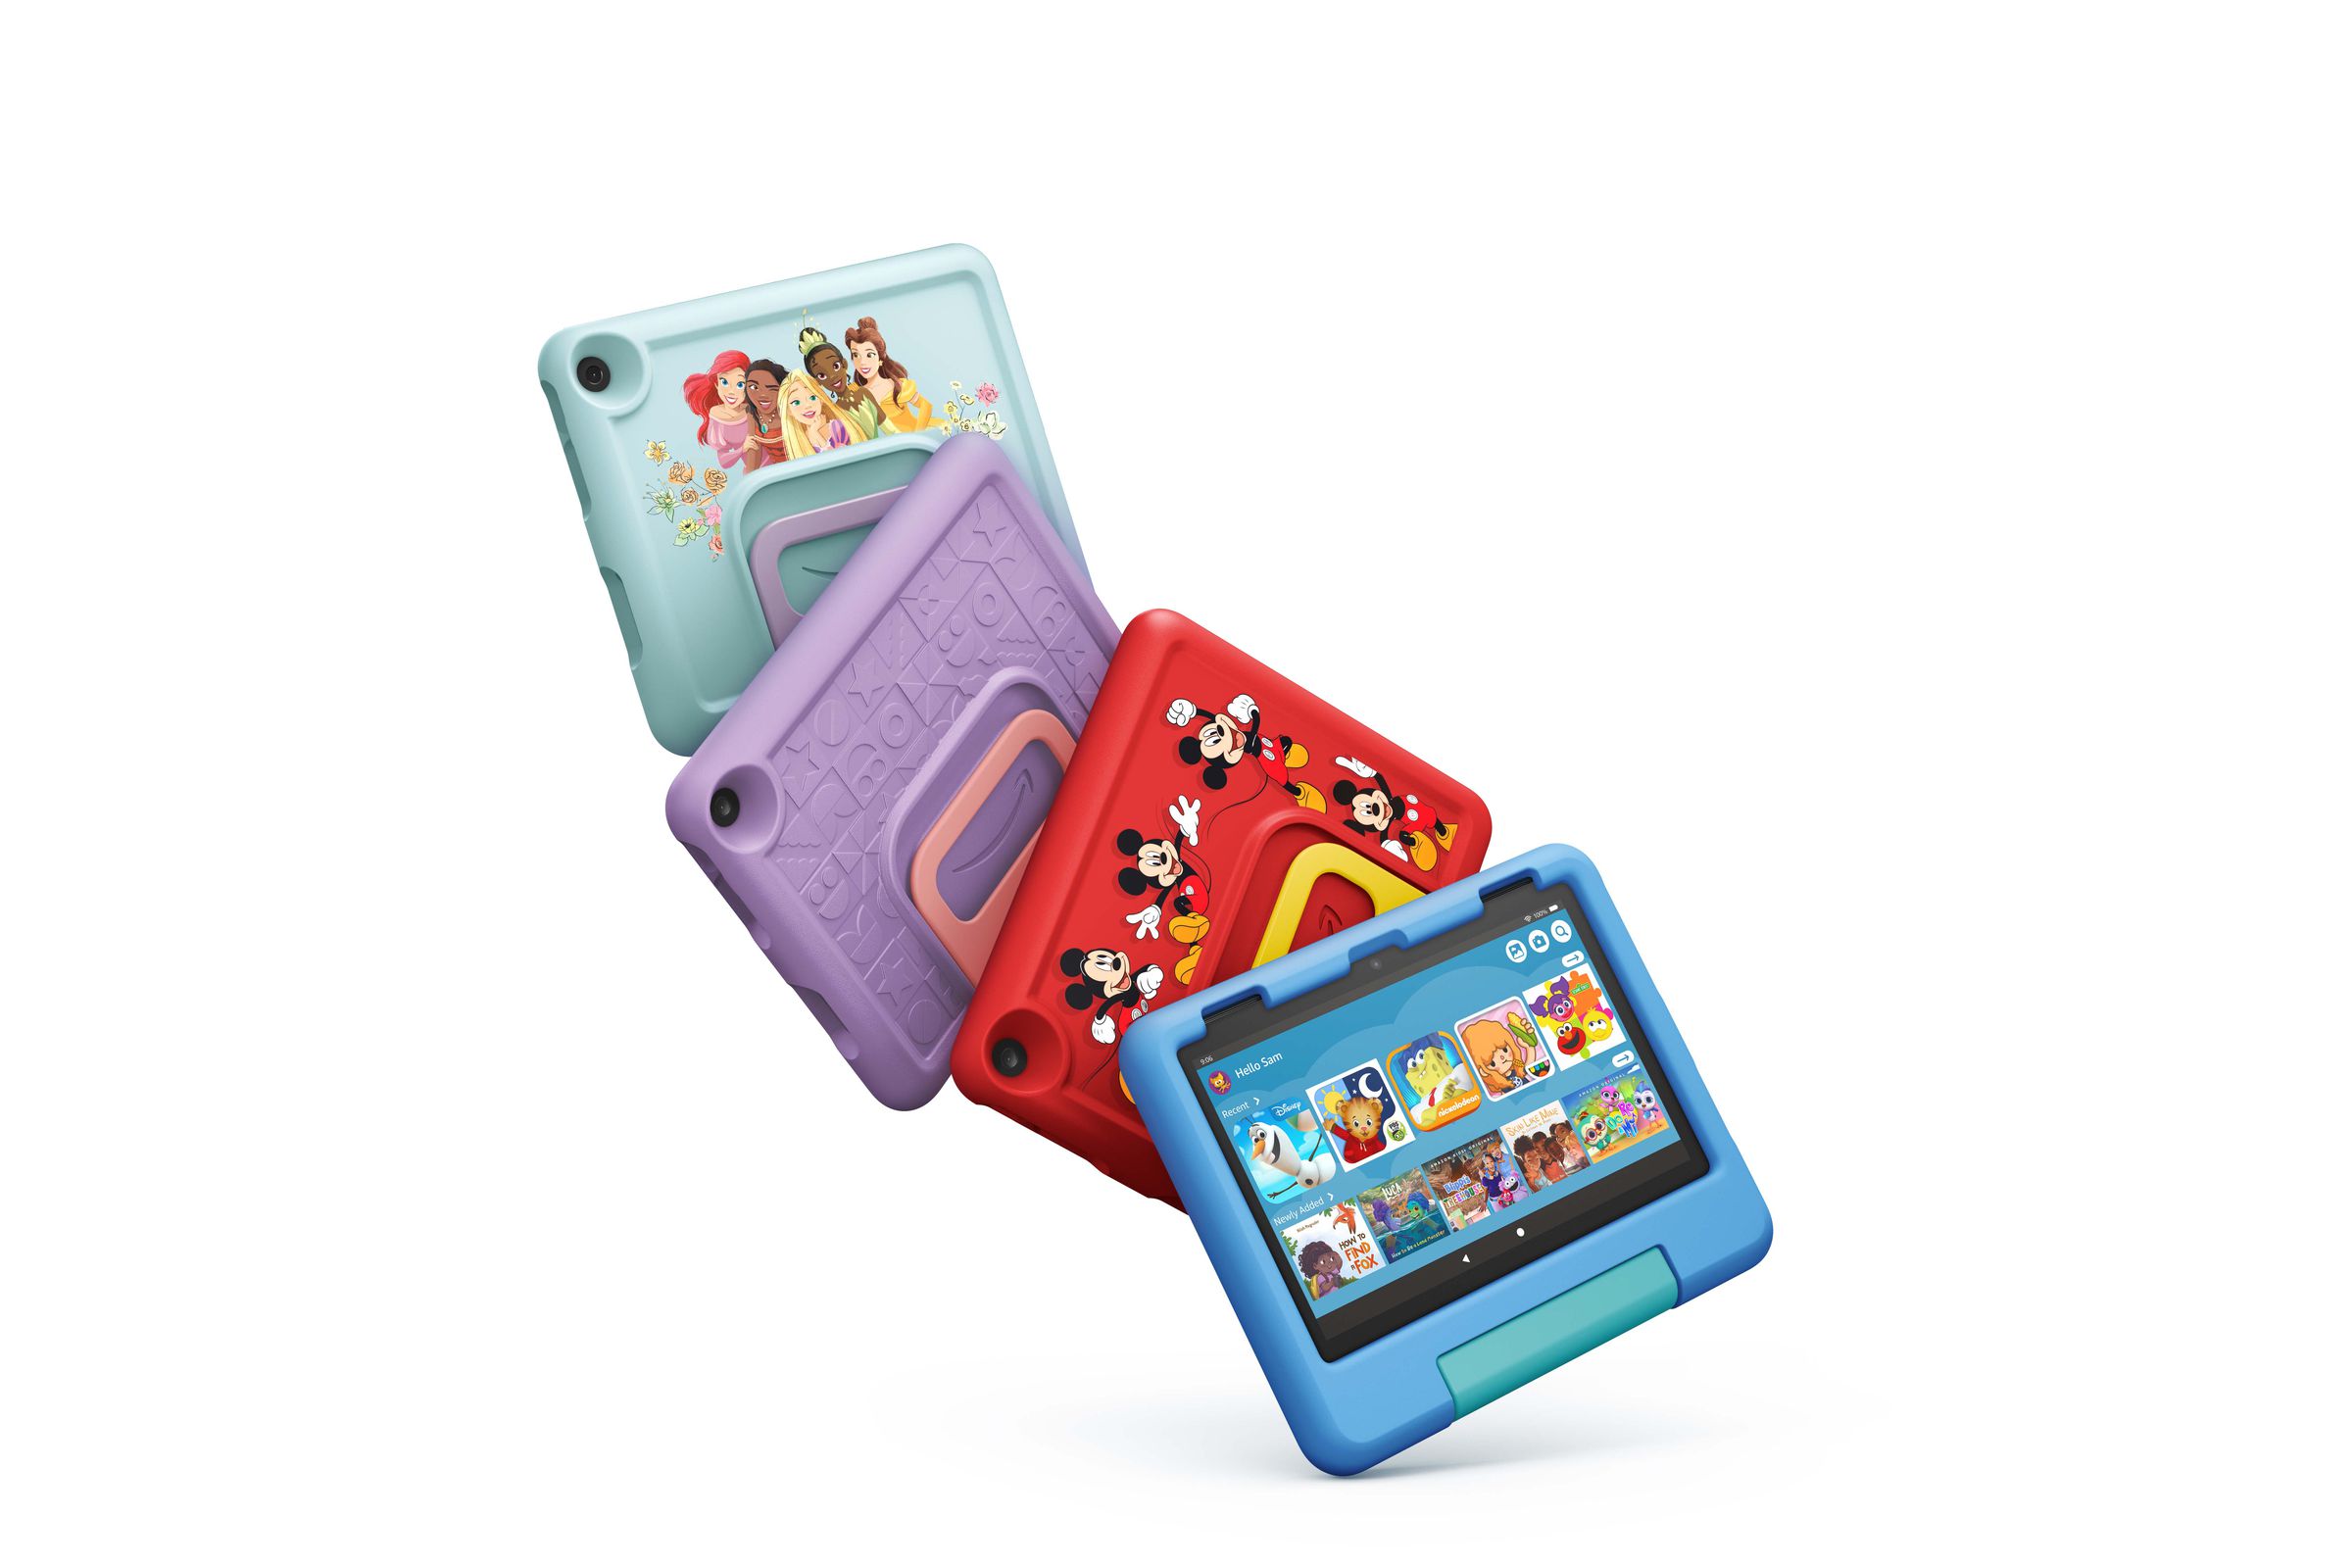 The Fire HD 8 Kids model with four different kid-proof case colors.